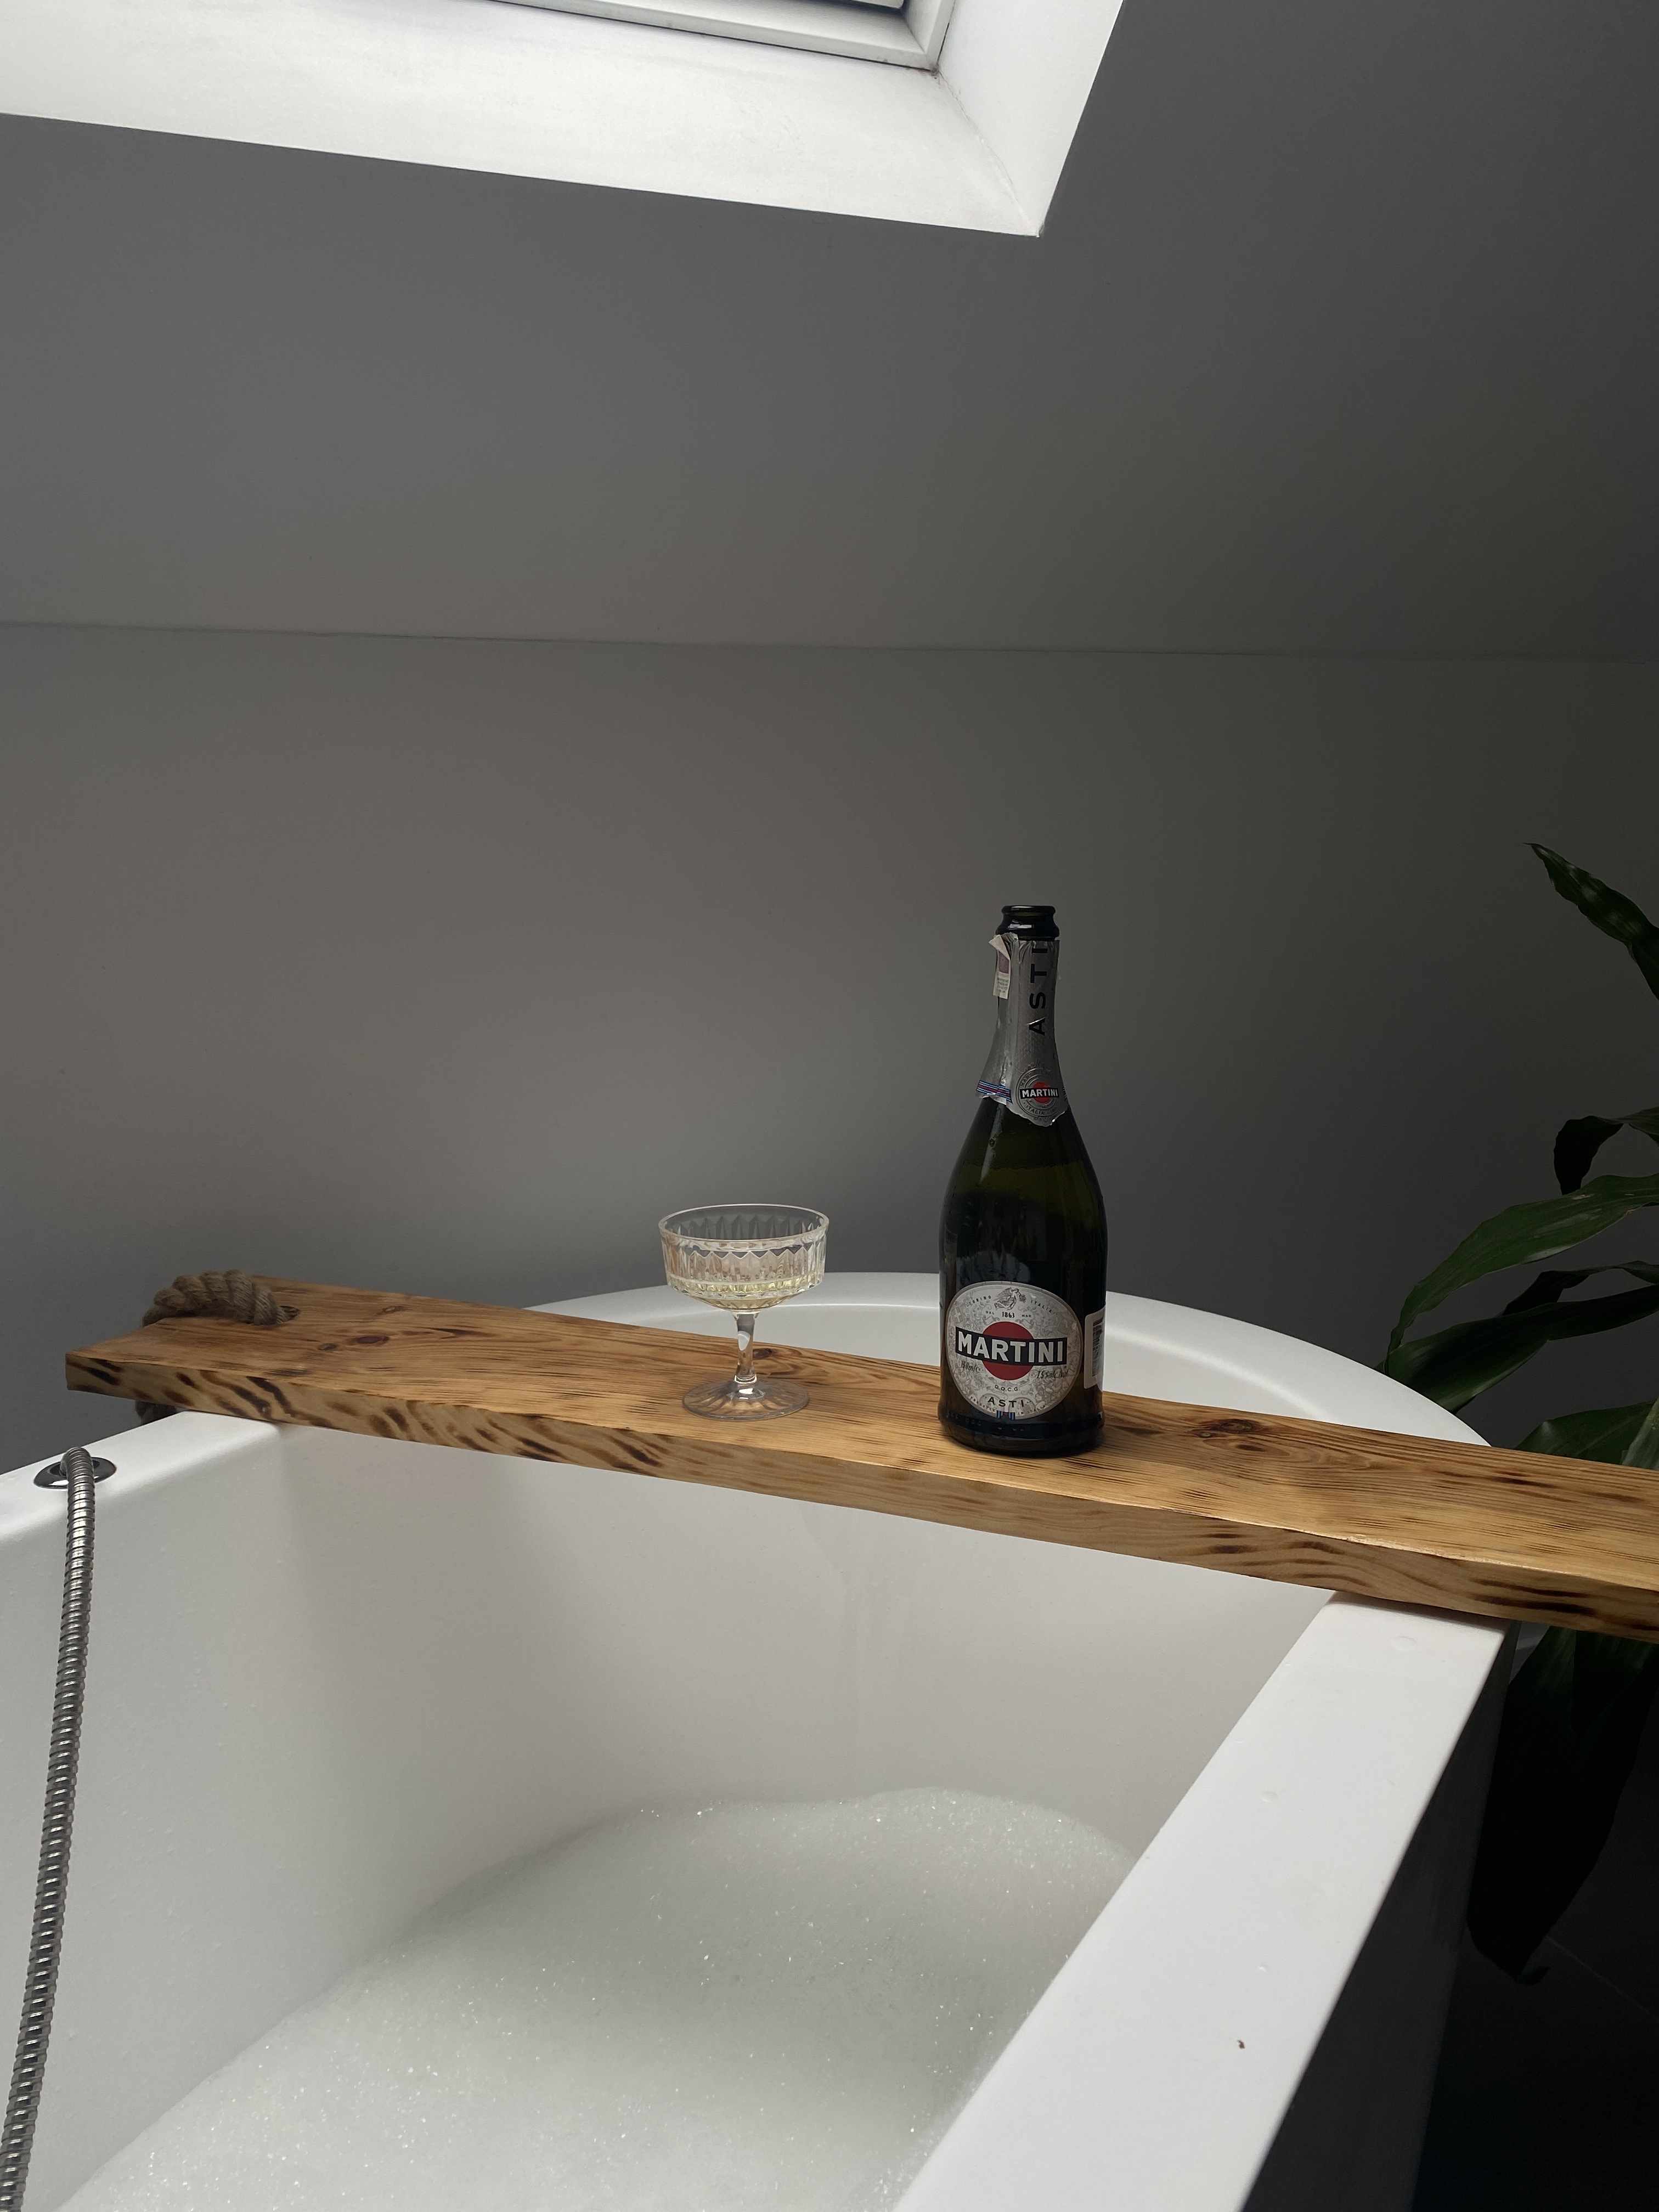 A bottle of wine and a goblet on a bathtub caddy